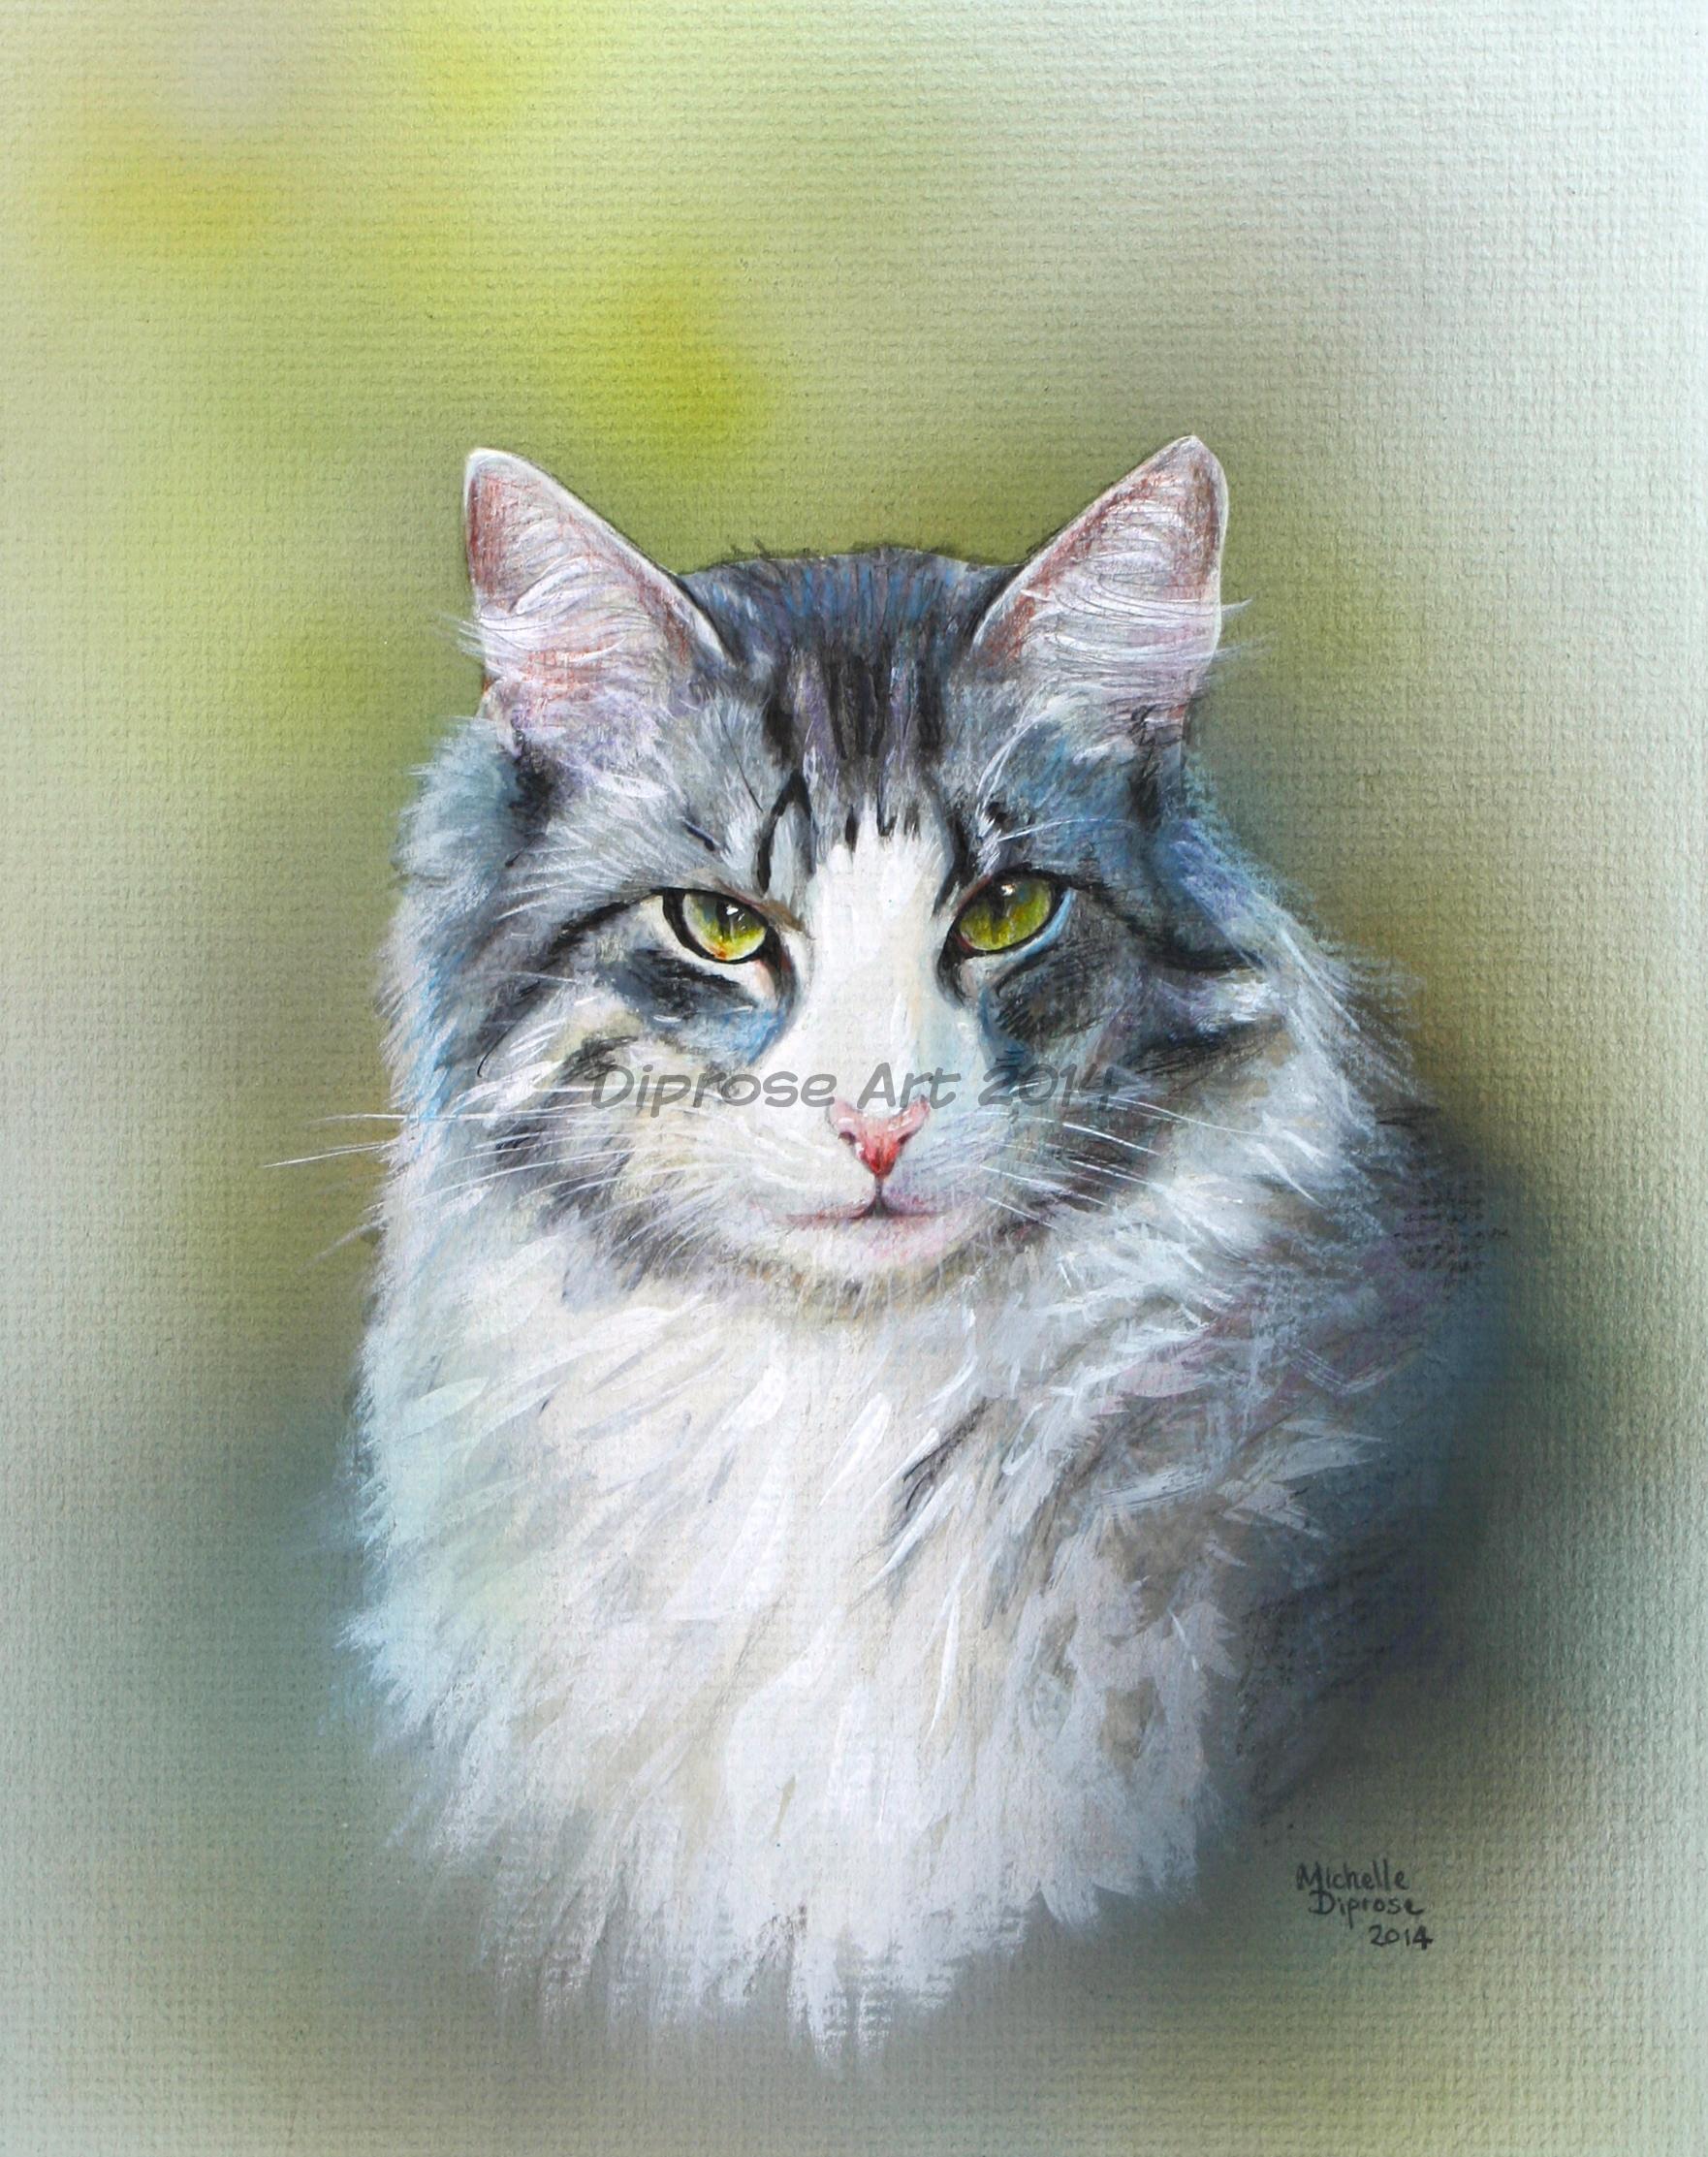 Acrylics on board - approx A4 - pet cat portrait - Norwegian Forest cats are special to me and I have probably painted more of them than any other breed.  Siggy was gorgeous and tragically killed which is so sad.